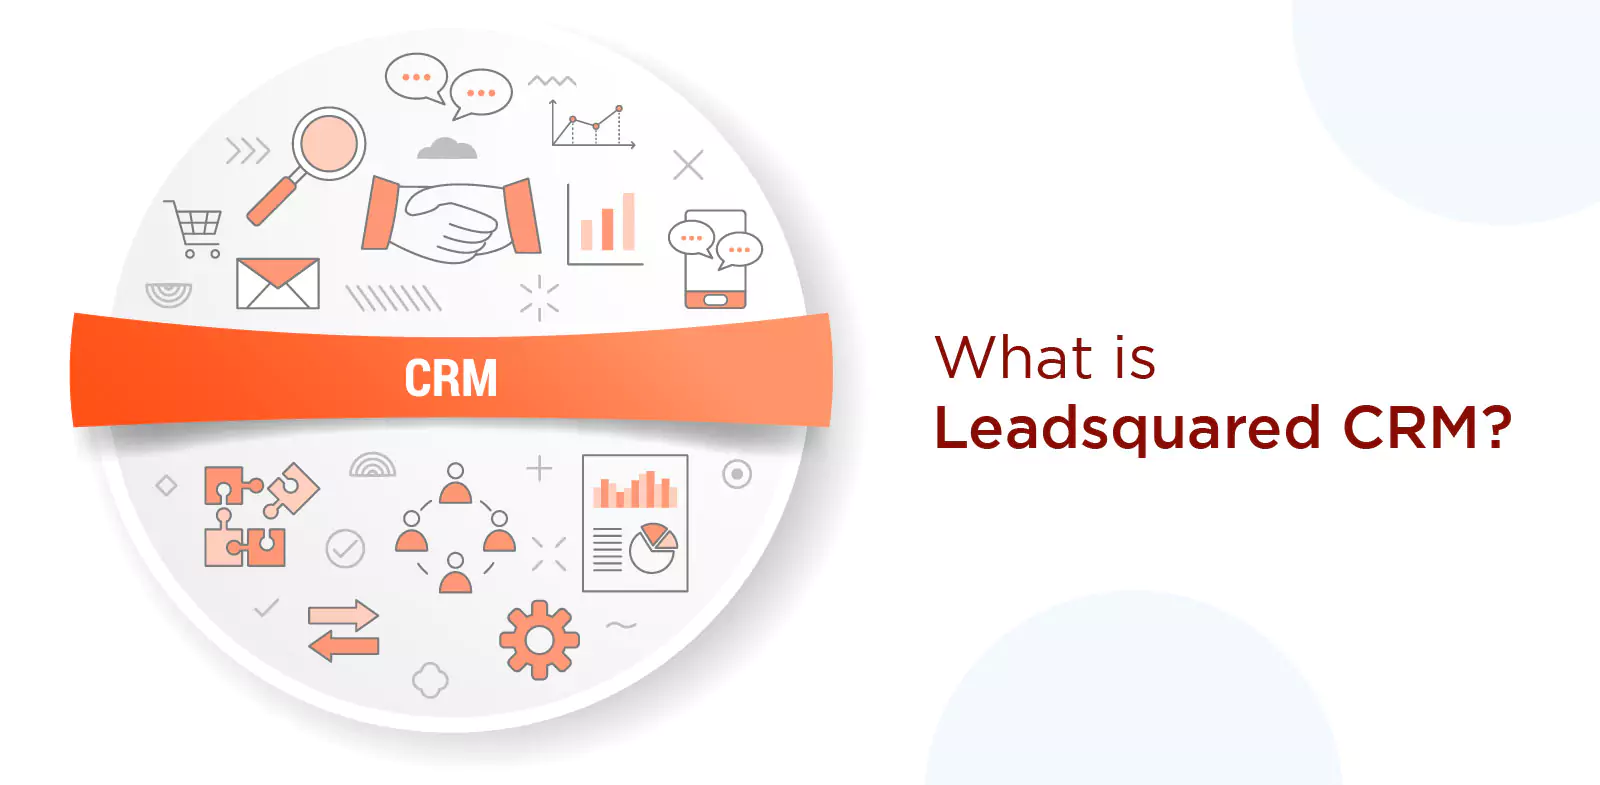 What is Leadsquared CRM?